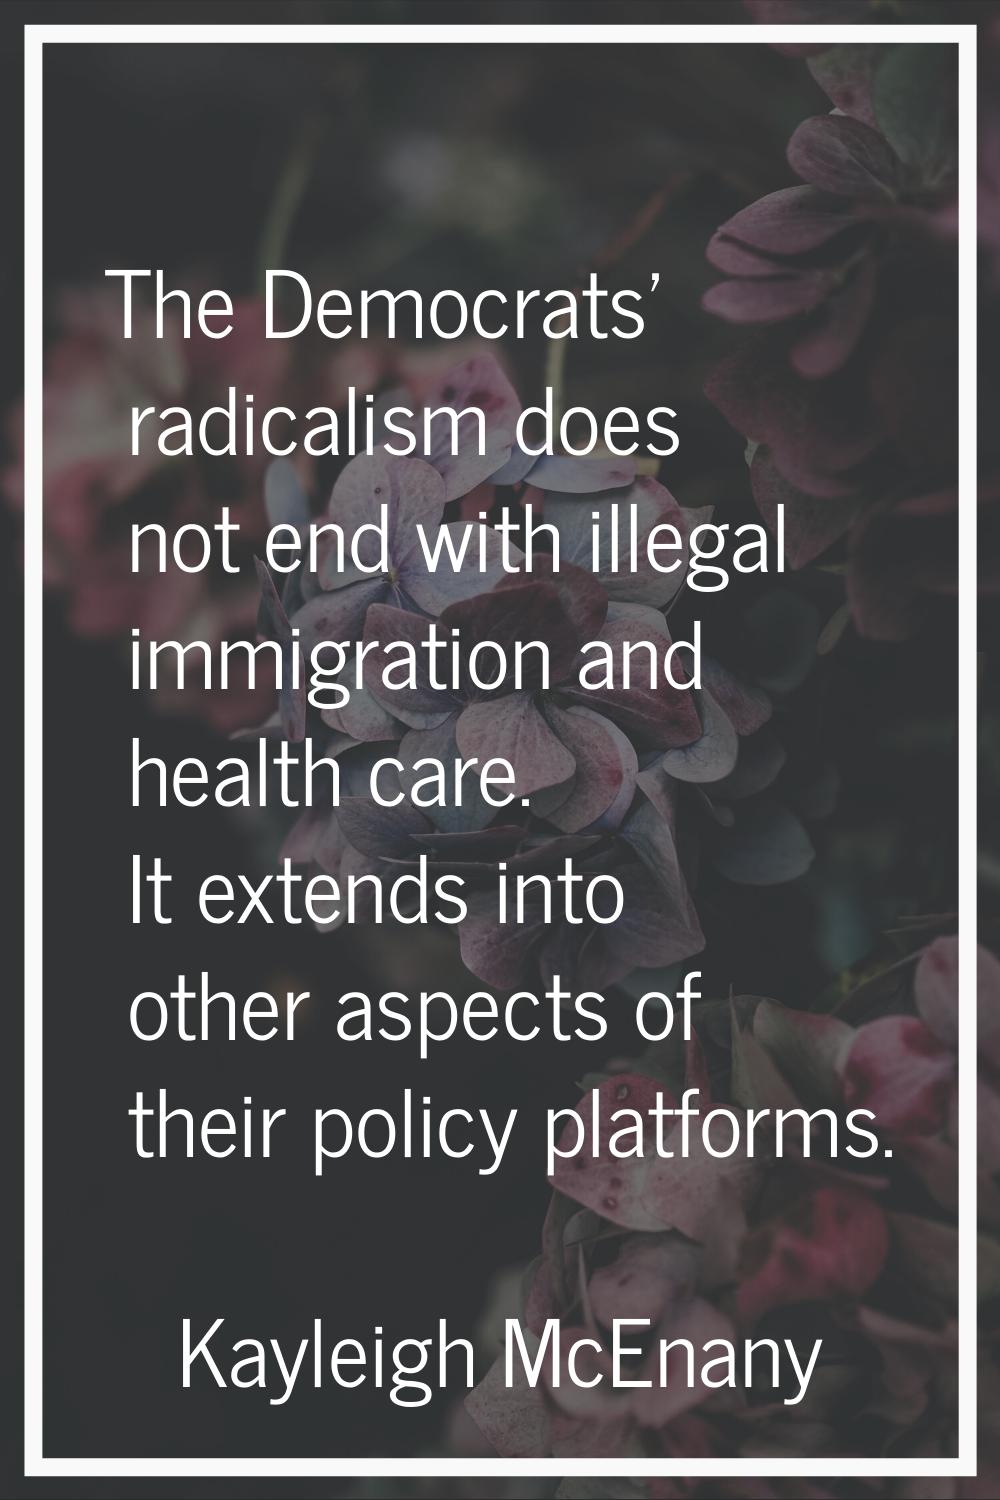 The Democrats' radicalism does not end with illegal immigration and health care. It extends into ot